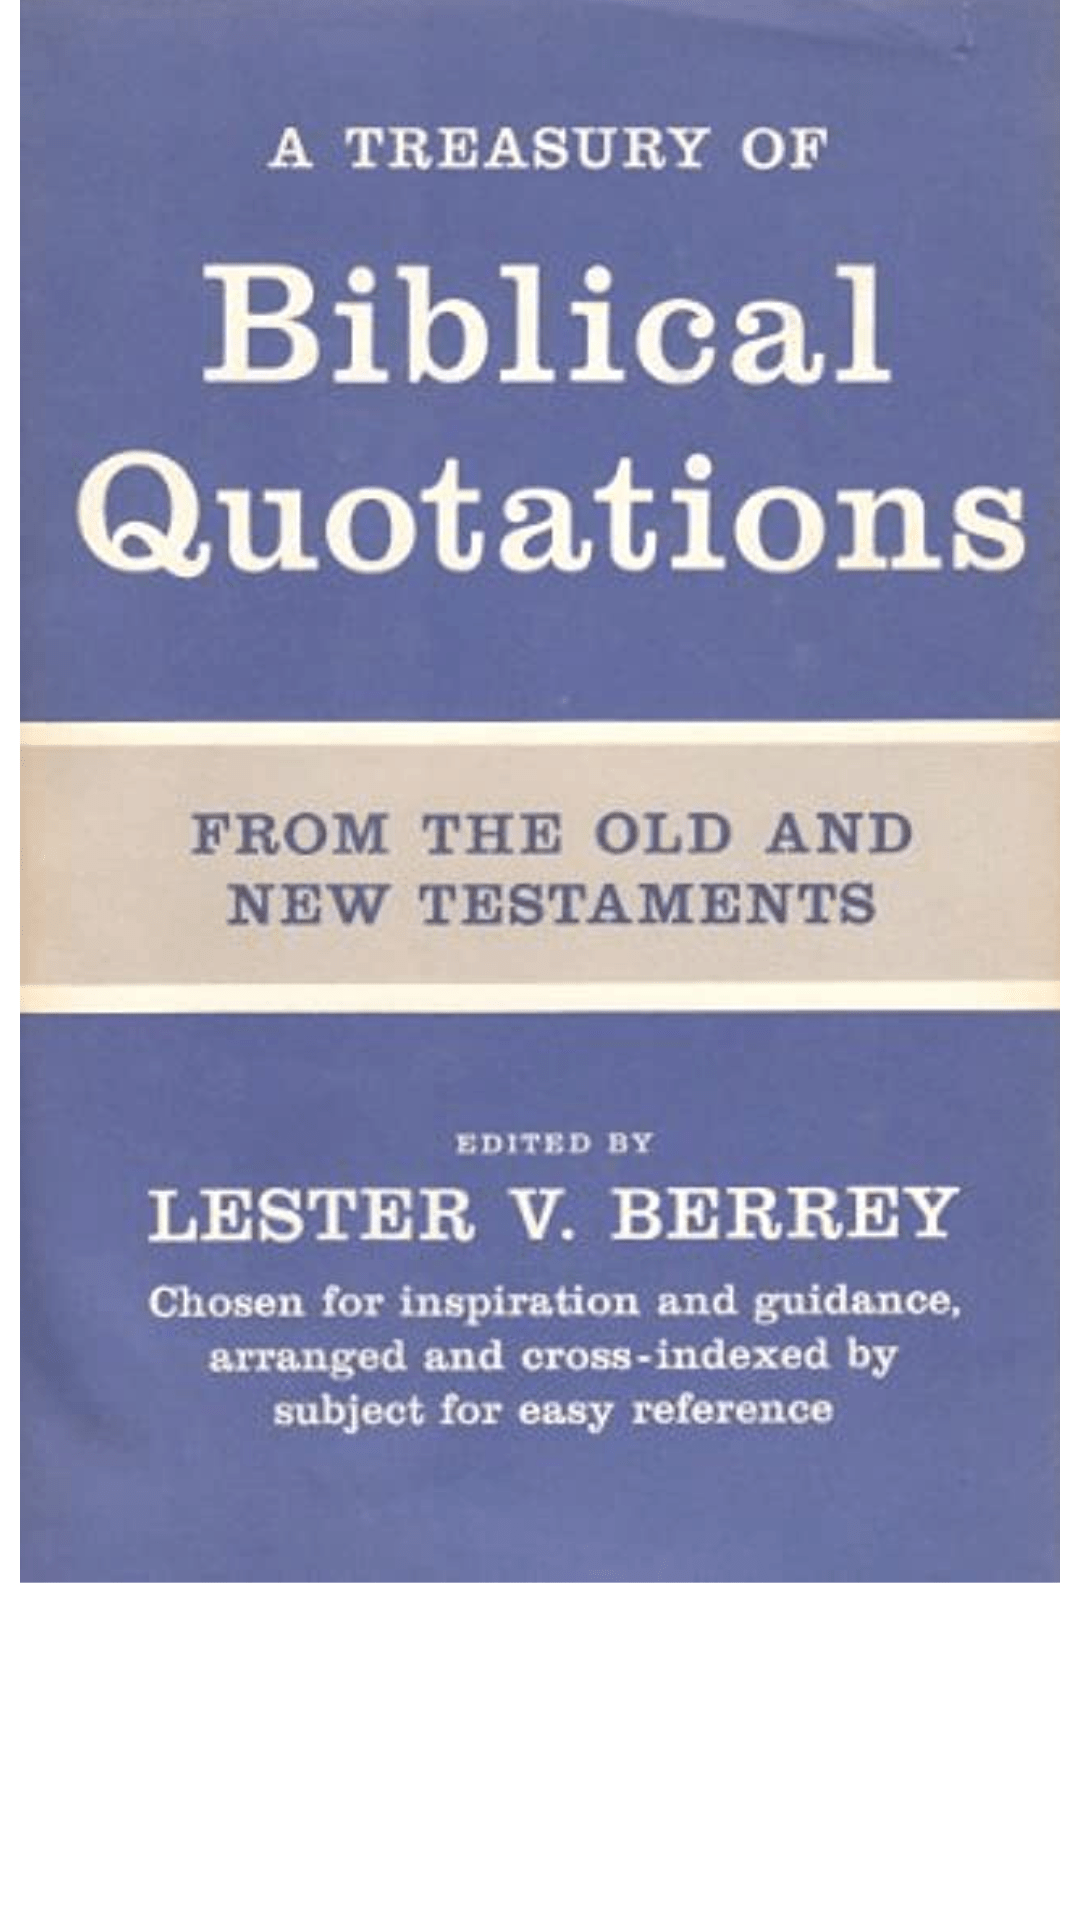 A Treasury of Biblical Quotations